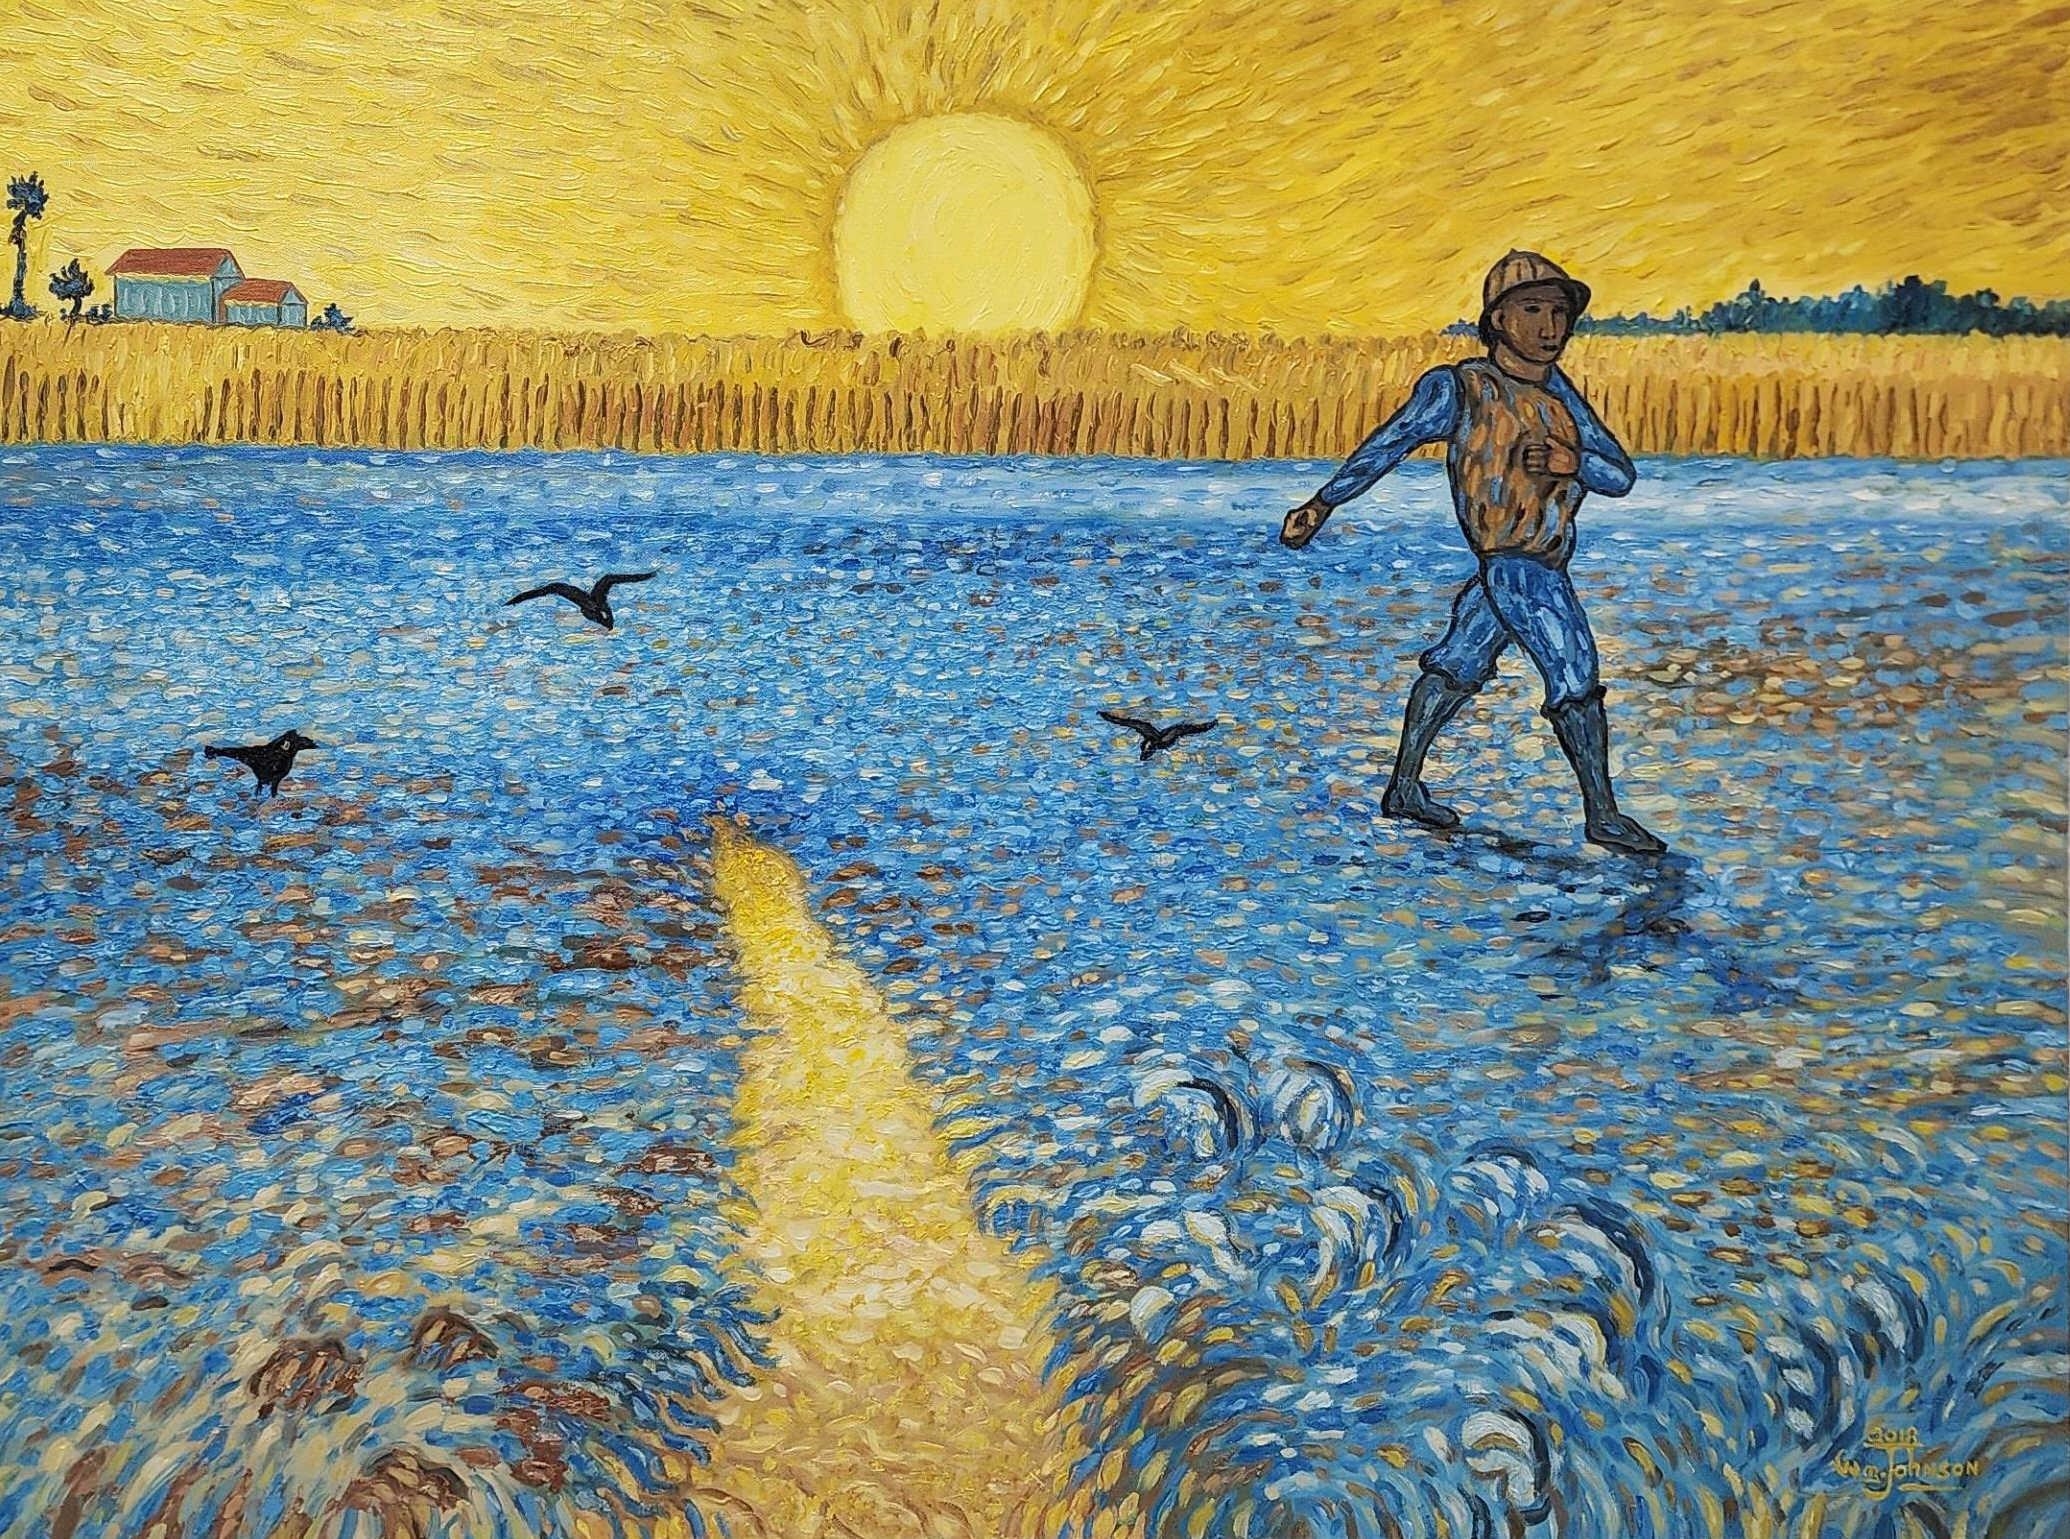 Painting Of Vincent Van Gogh's " Sower With Setting Sun- Arles by Vincent van Gogh, 1888